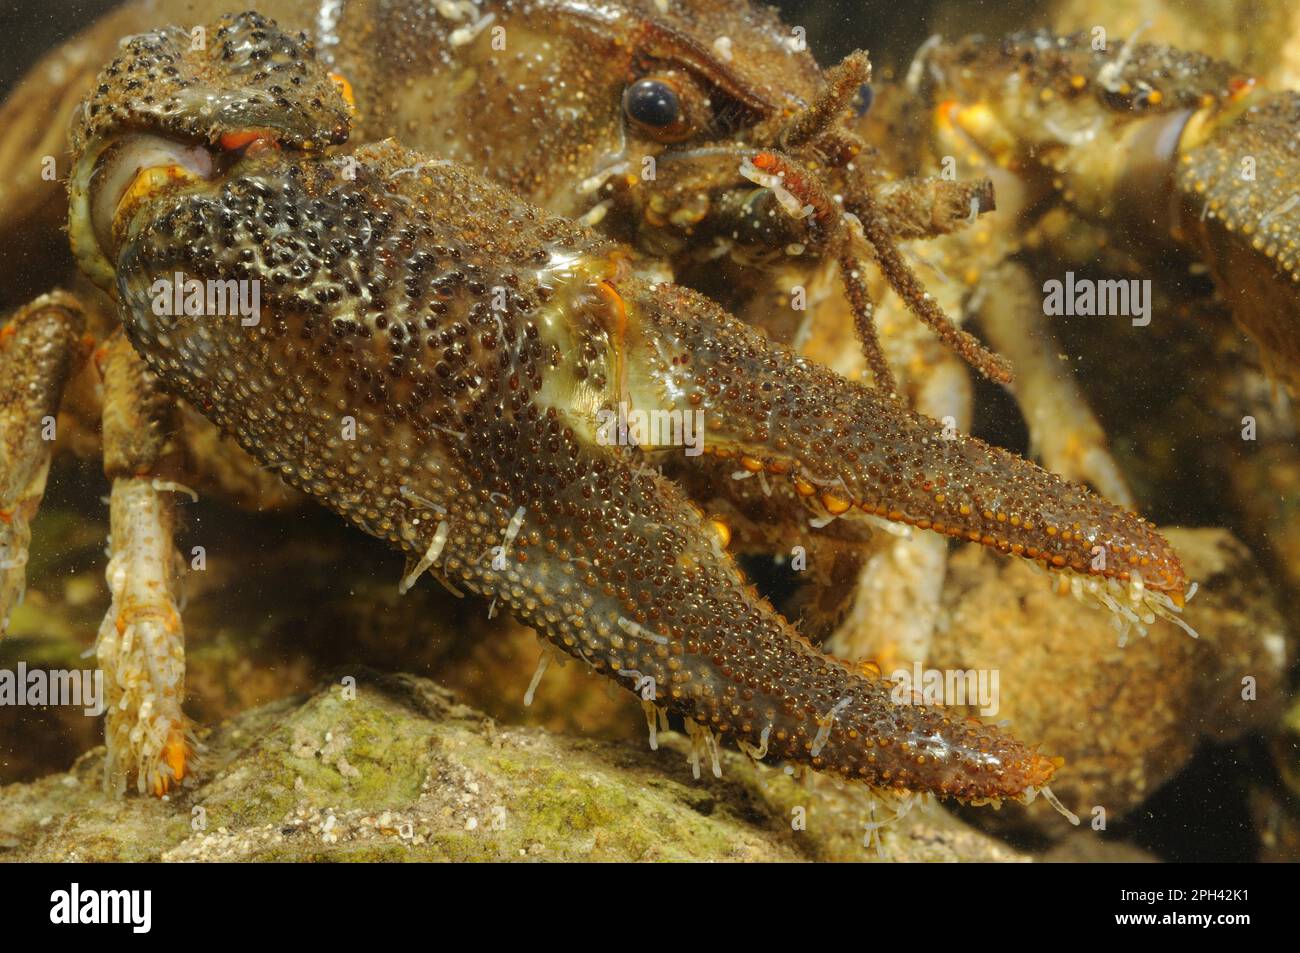 White-clawed Freshwater Crayfish (Austropotamobius italicus) adult male, close-up of claw with Parasitic Annelid (Branchiobdella astaci) Stock Photo